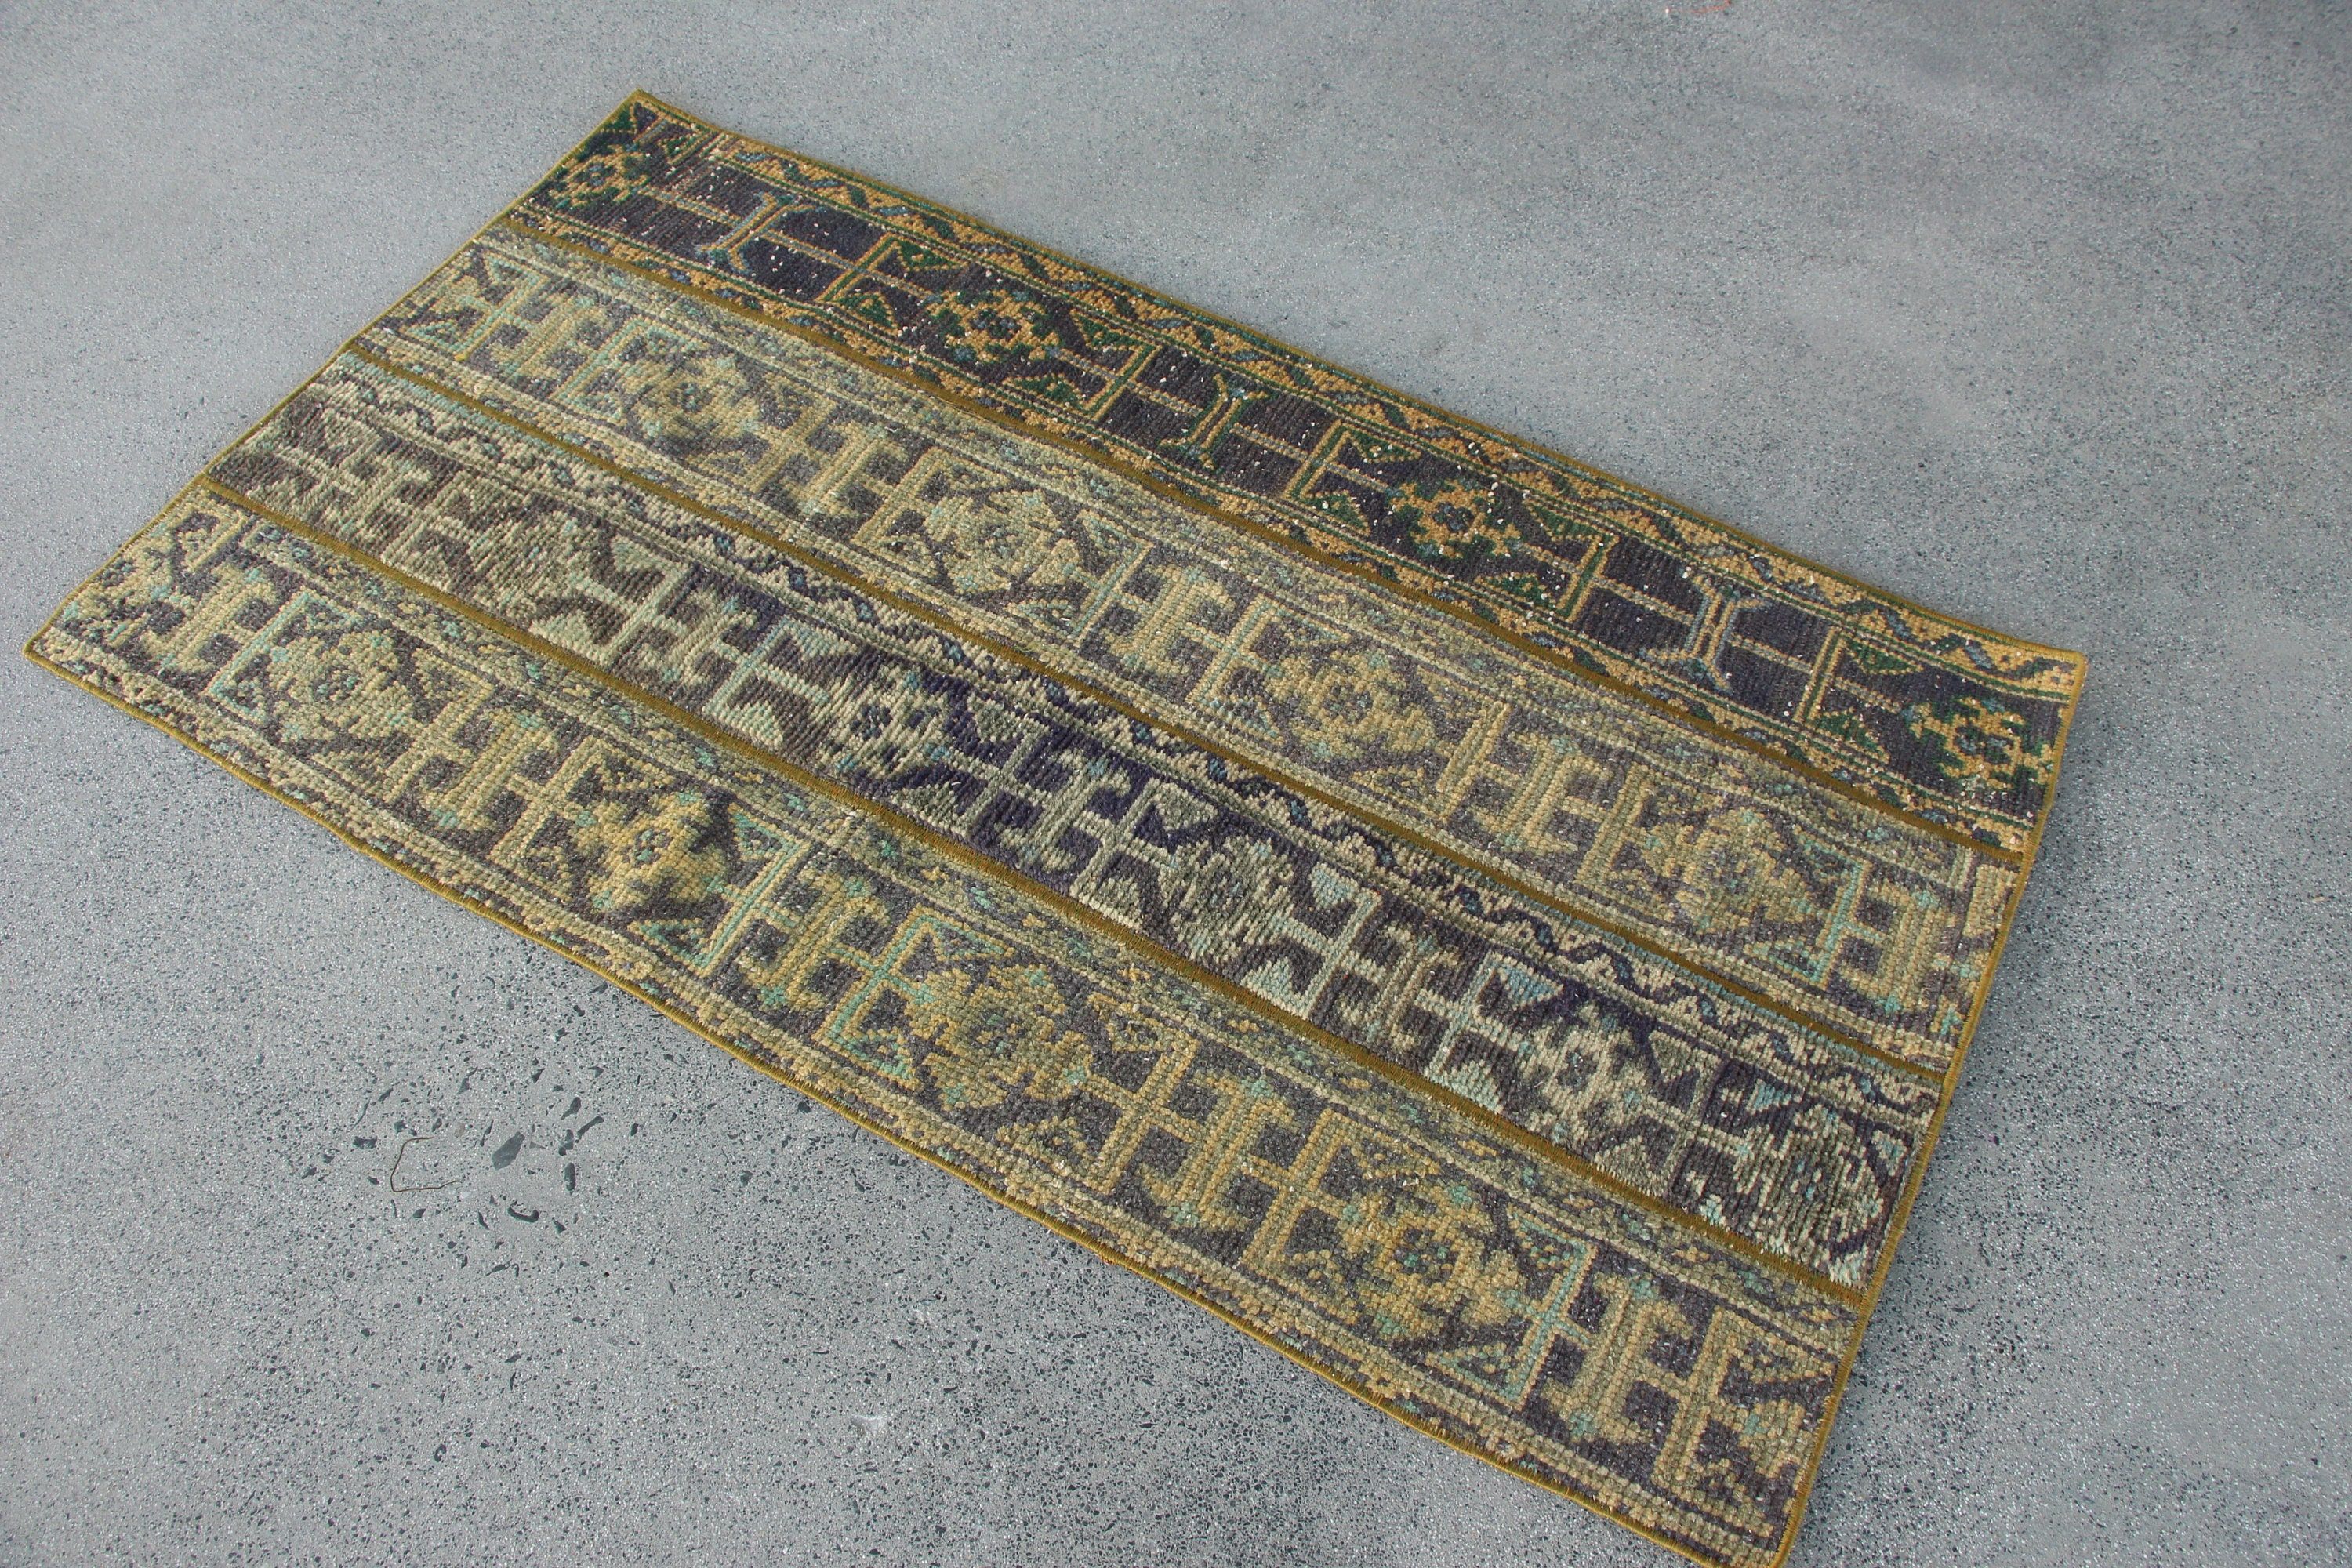 Vintage Rugs, Kitchen Rug, 2.7x4.9 ft Small Rug, Rugs for Door Mat, Blue Moroccan Rug, Bedroom Rug, Turkish Rug, Bright Rugs, Antique Rugs